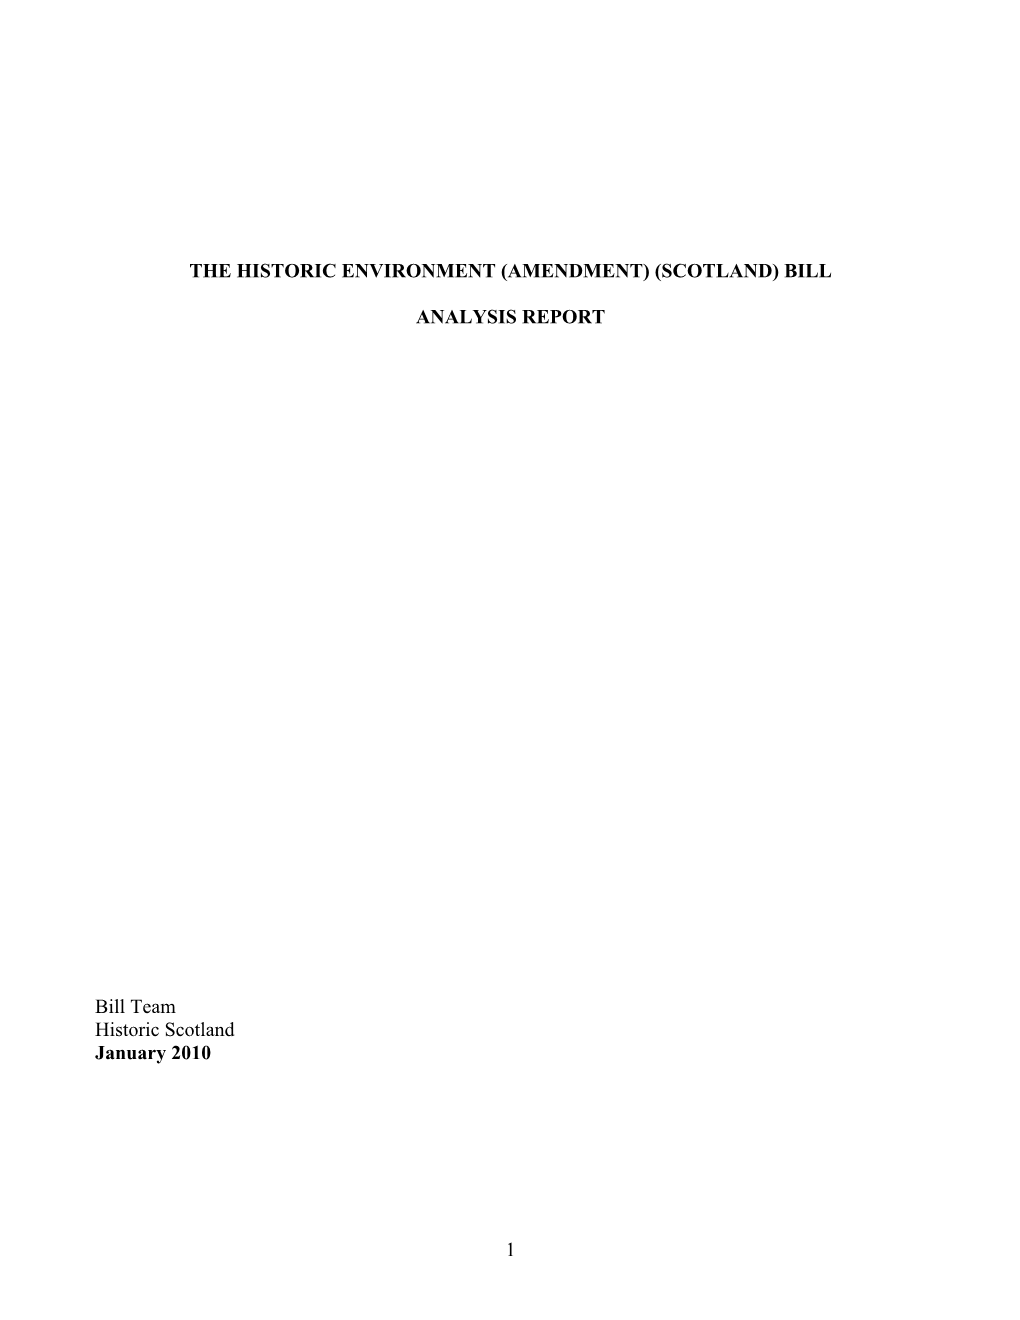 The Ancient Monuments and Listed Buildings (Amendment) (Scotland) Bill at the Time of the Consultation)